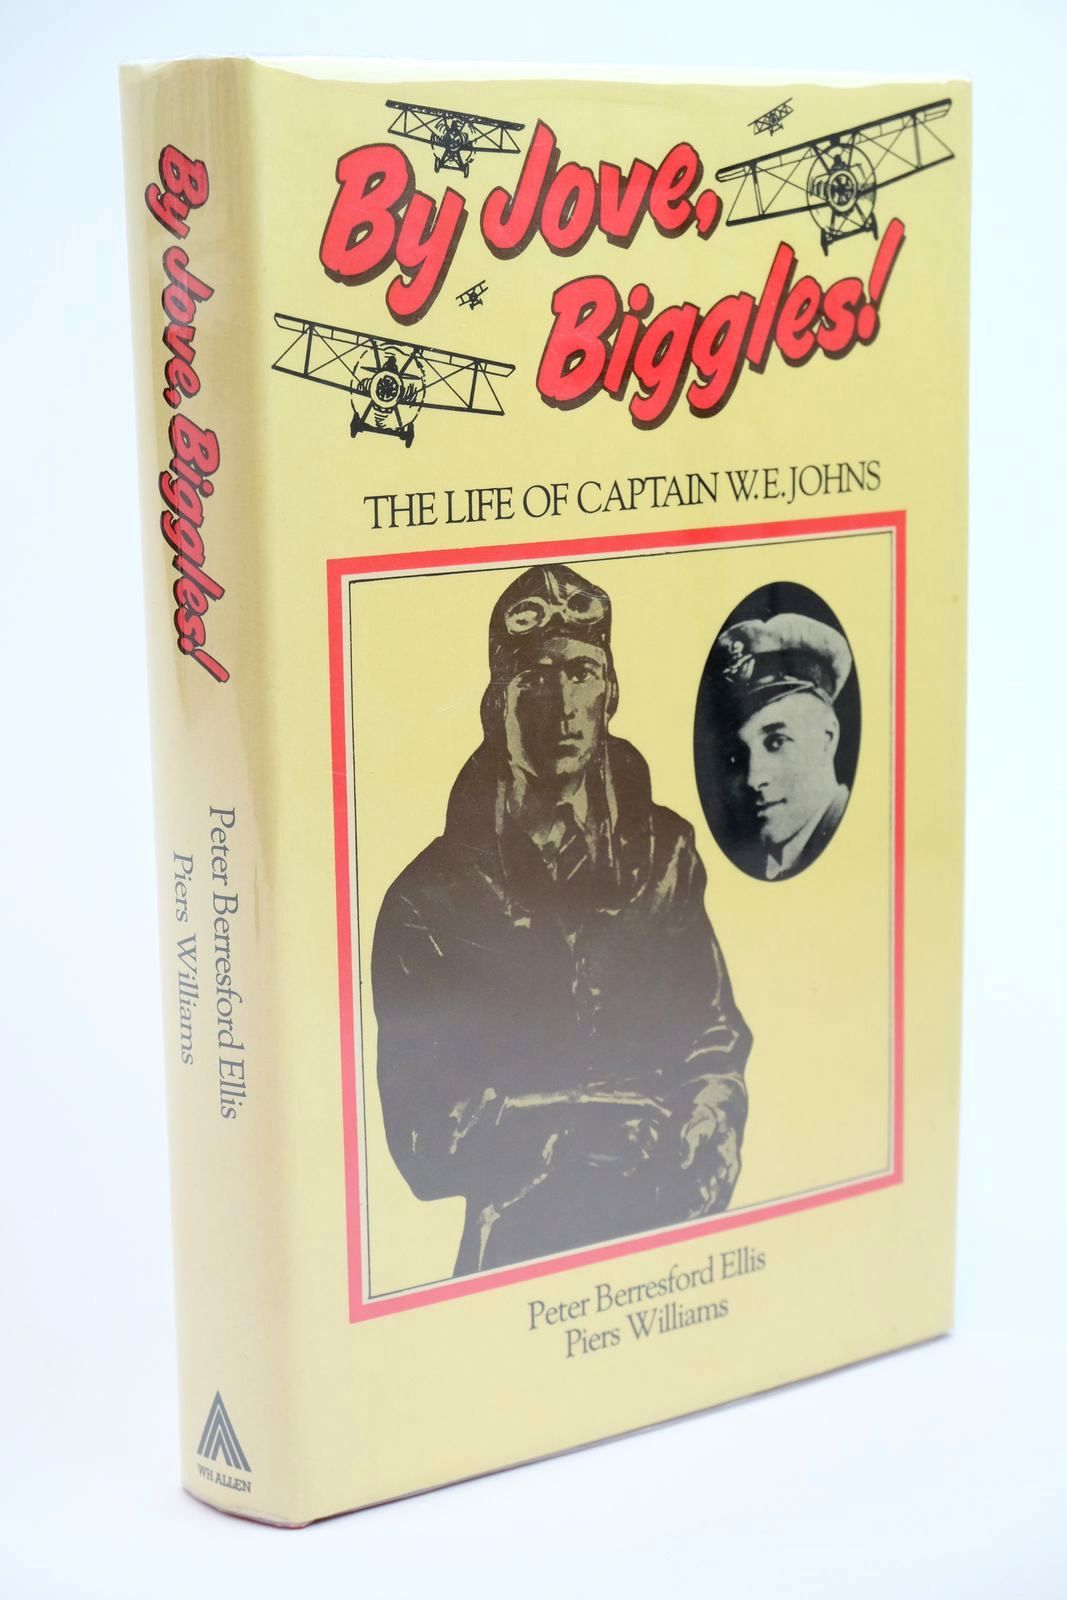 Photo of BY JOVE, BIGGLES! written by Ellis, Peter Berresford
Williams, Piers published by W.H. Allen (STOCK CODE: 1323213)  for sale by Stella & Rose's Books